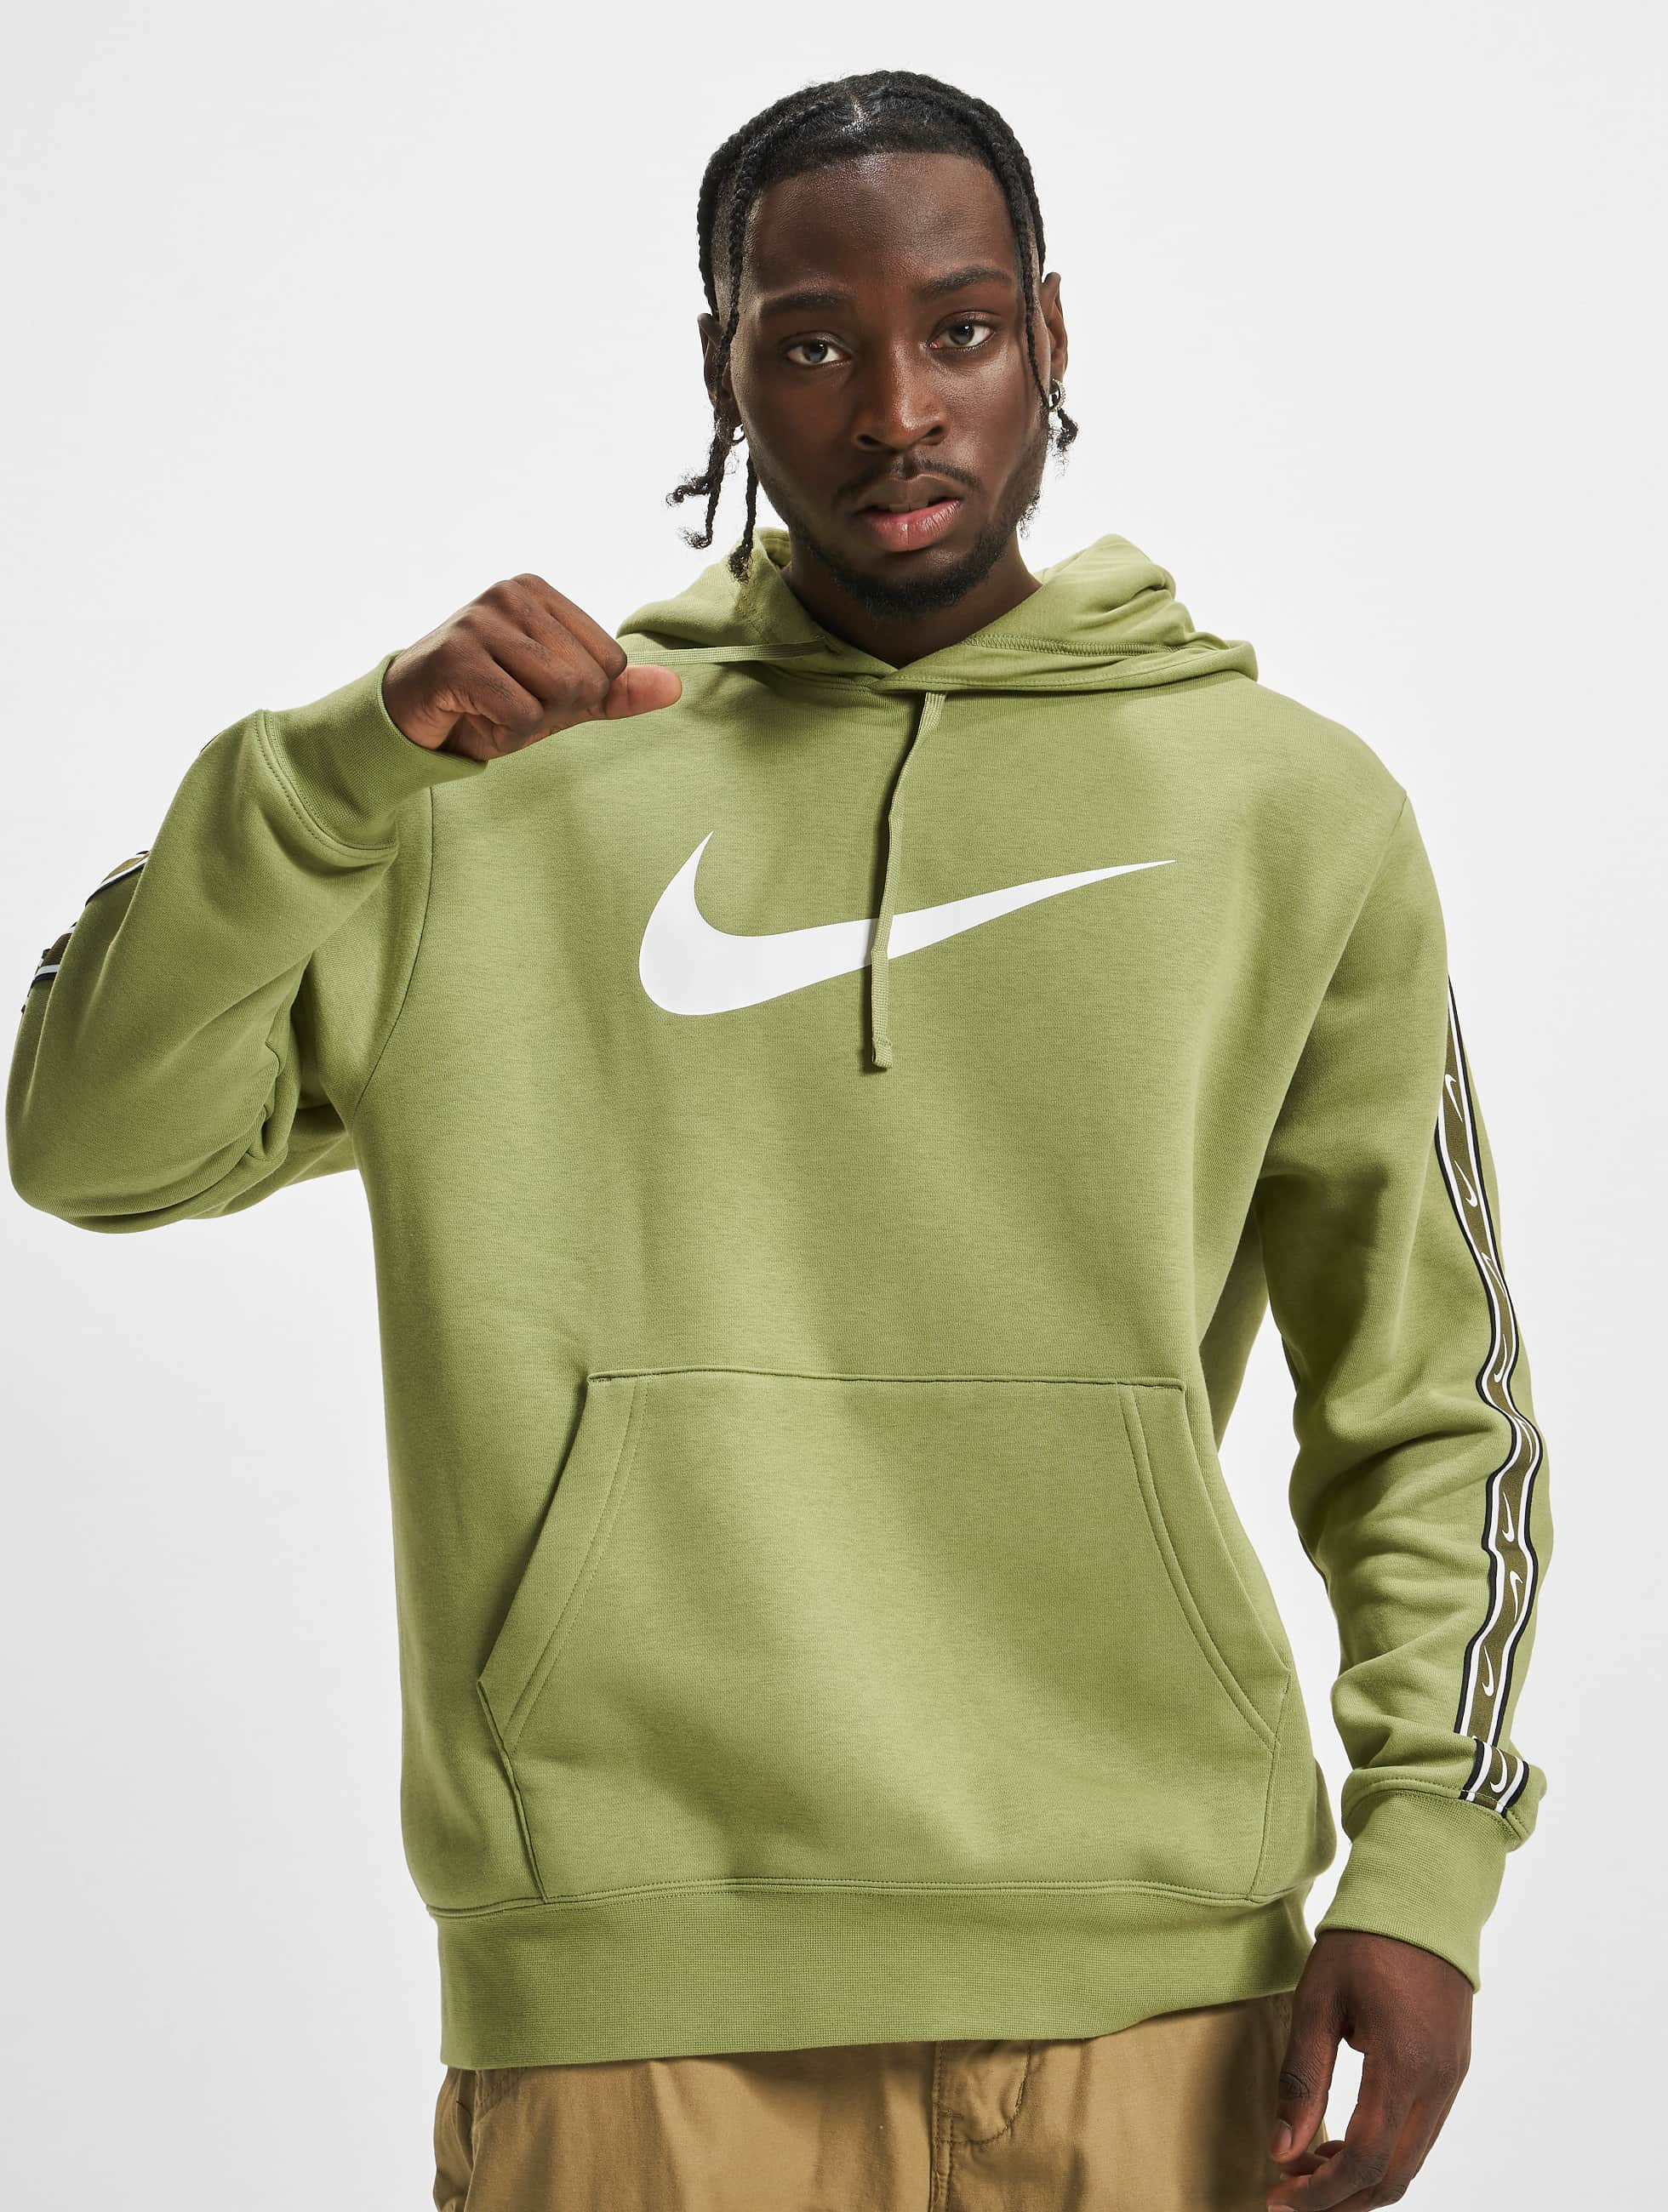 Olive Green Nike Zip Up | peacecommission.kdsg.gov.ng